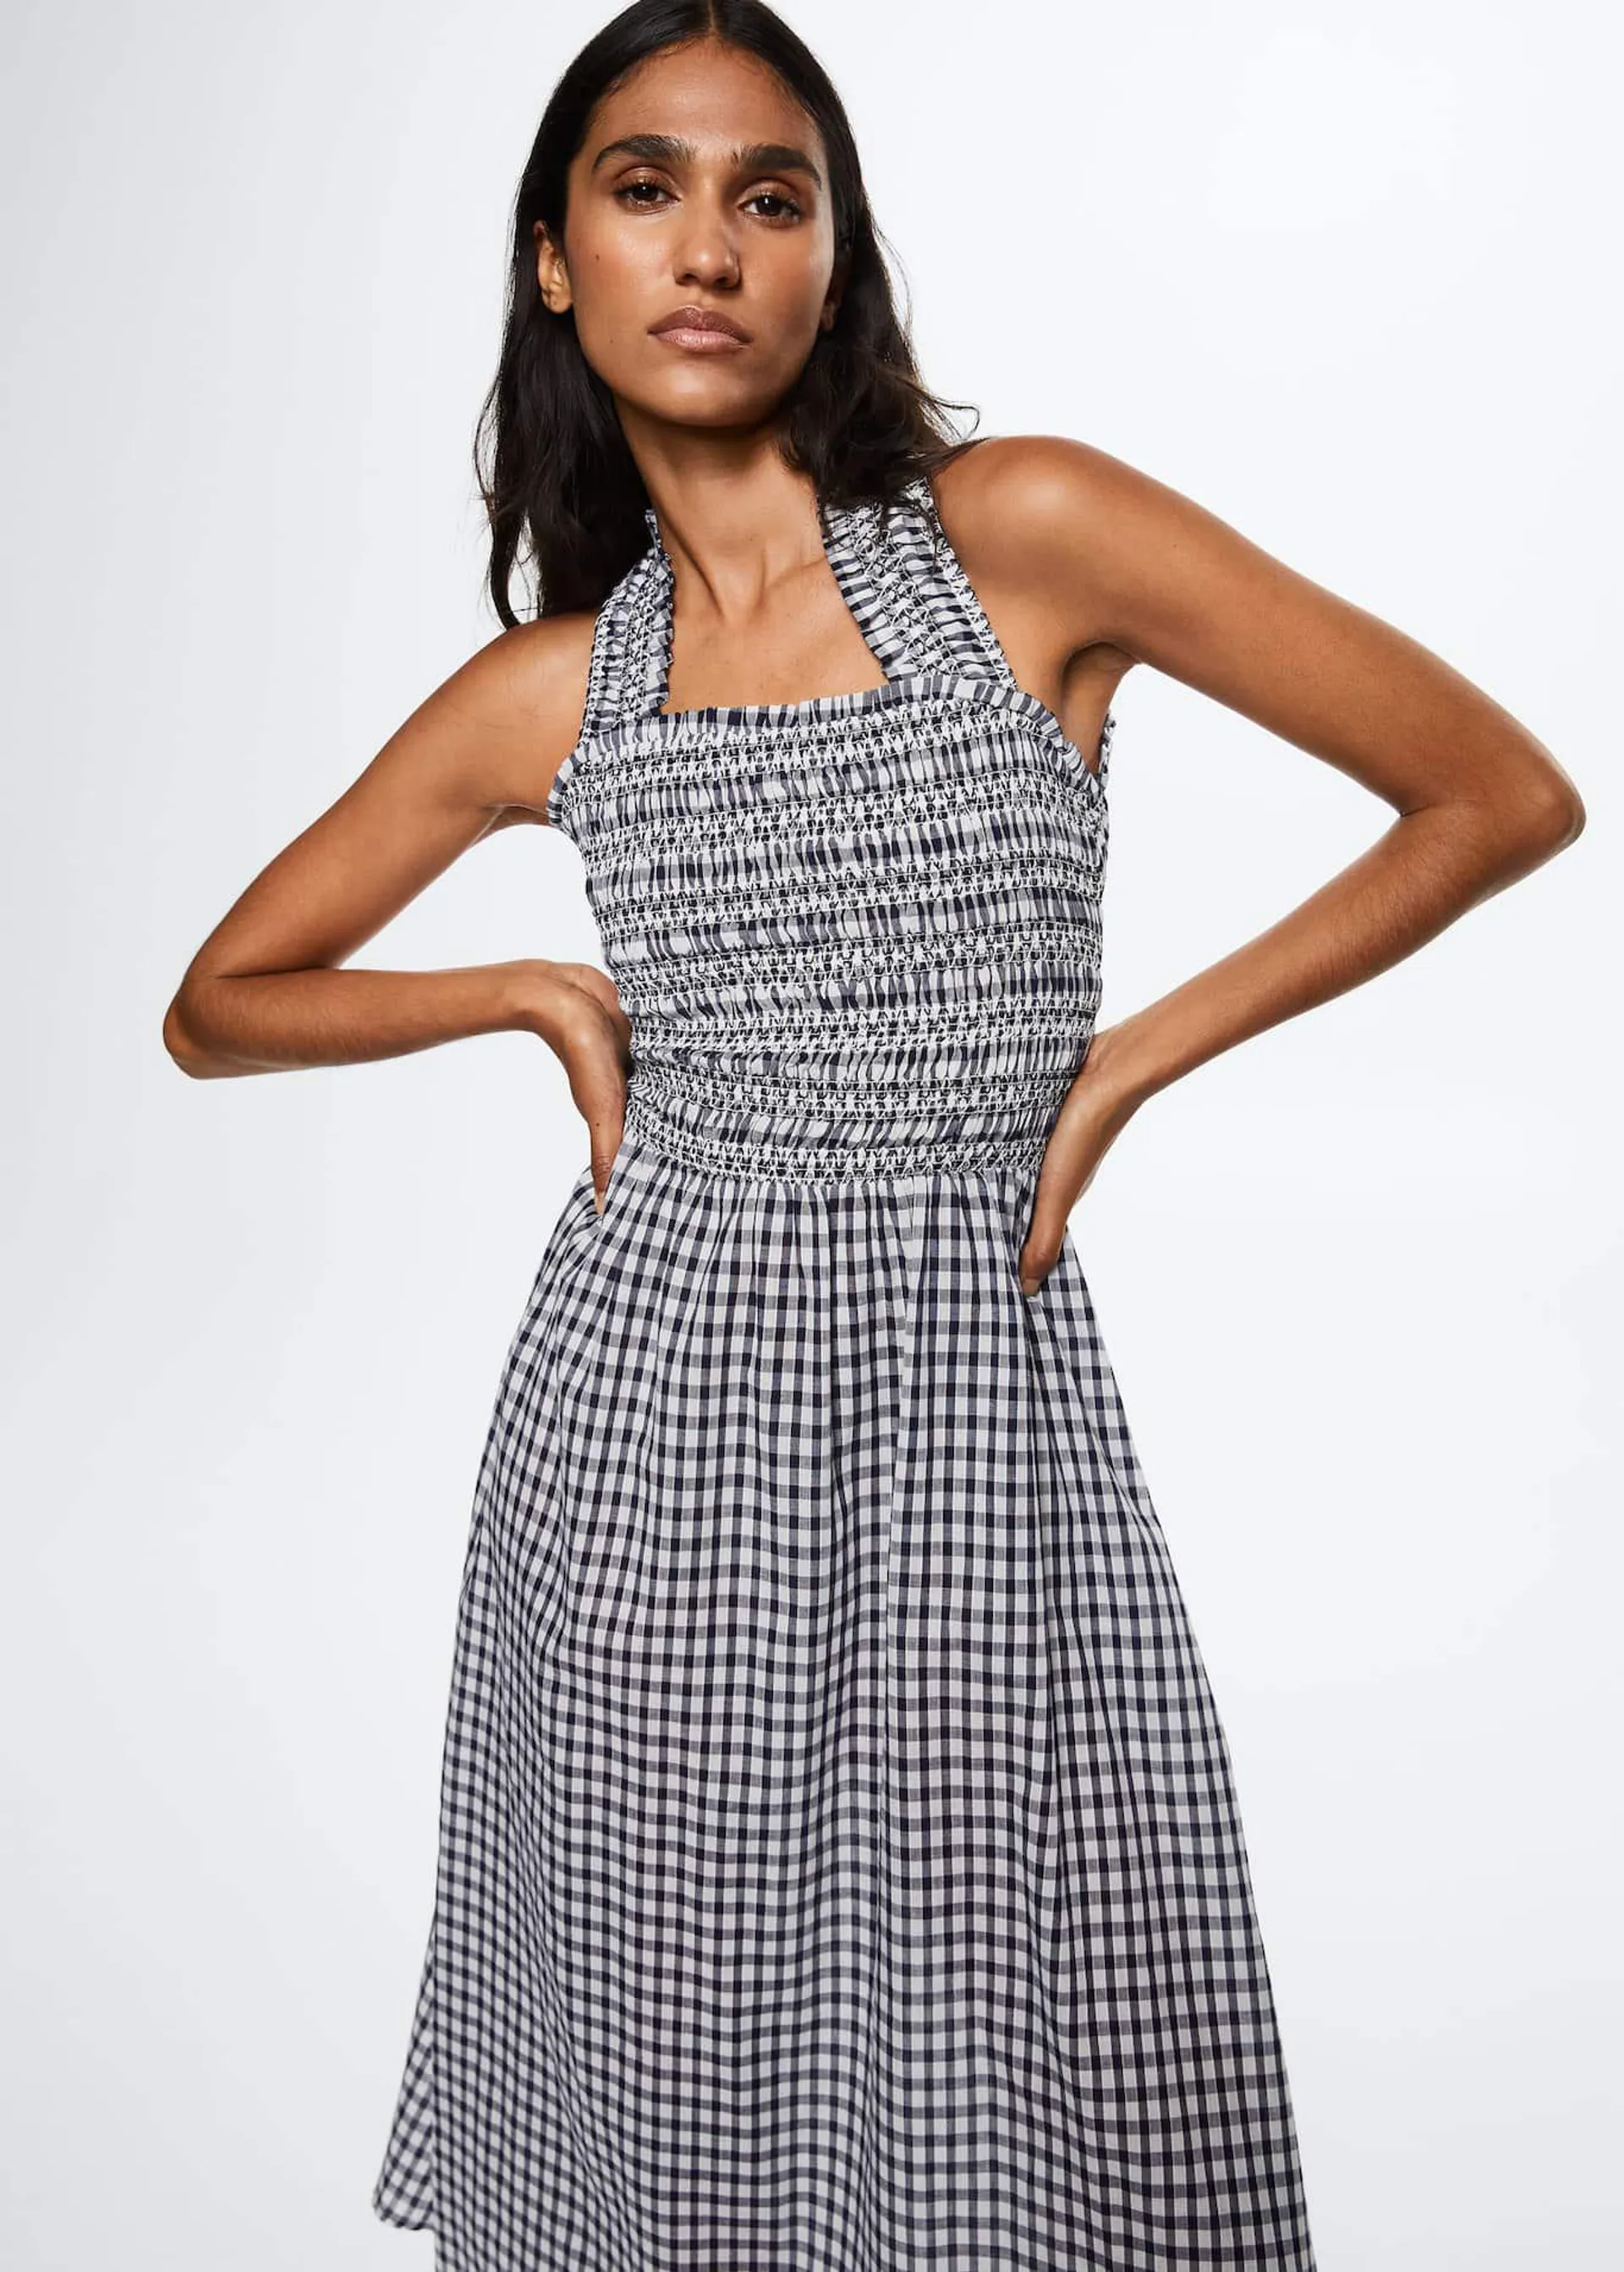 Gingham check cottoned dress